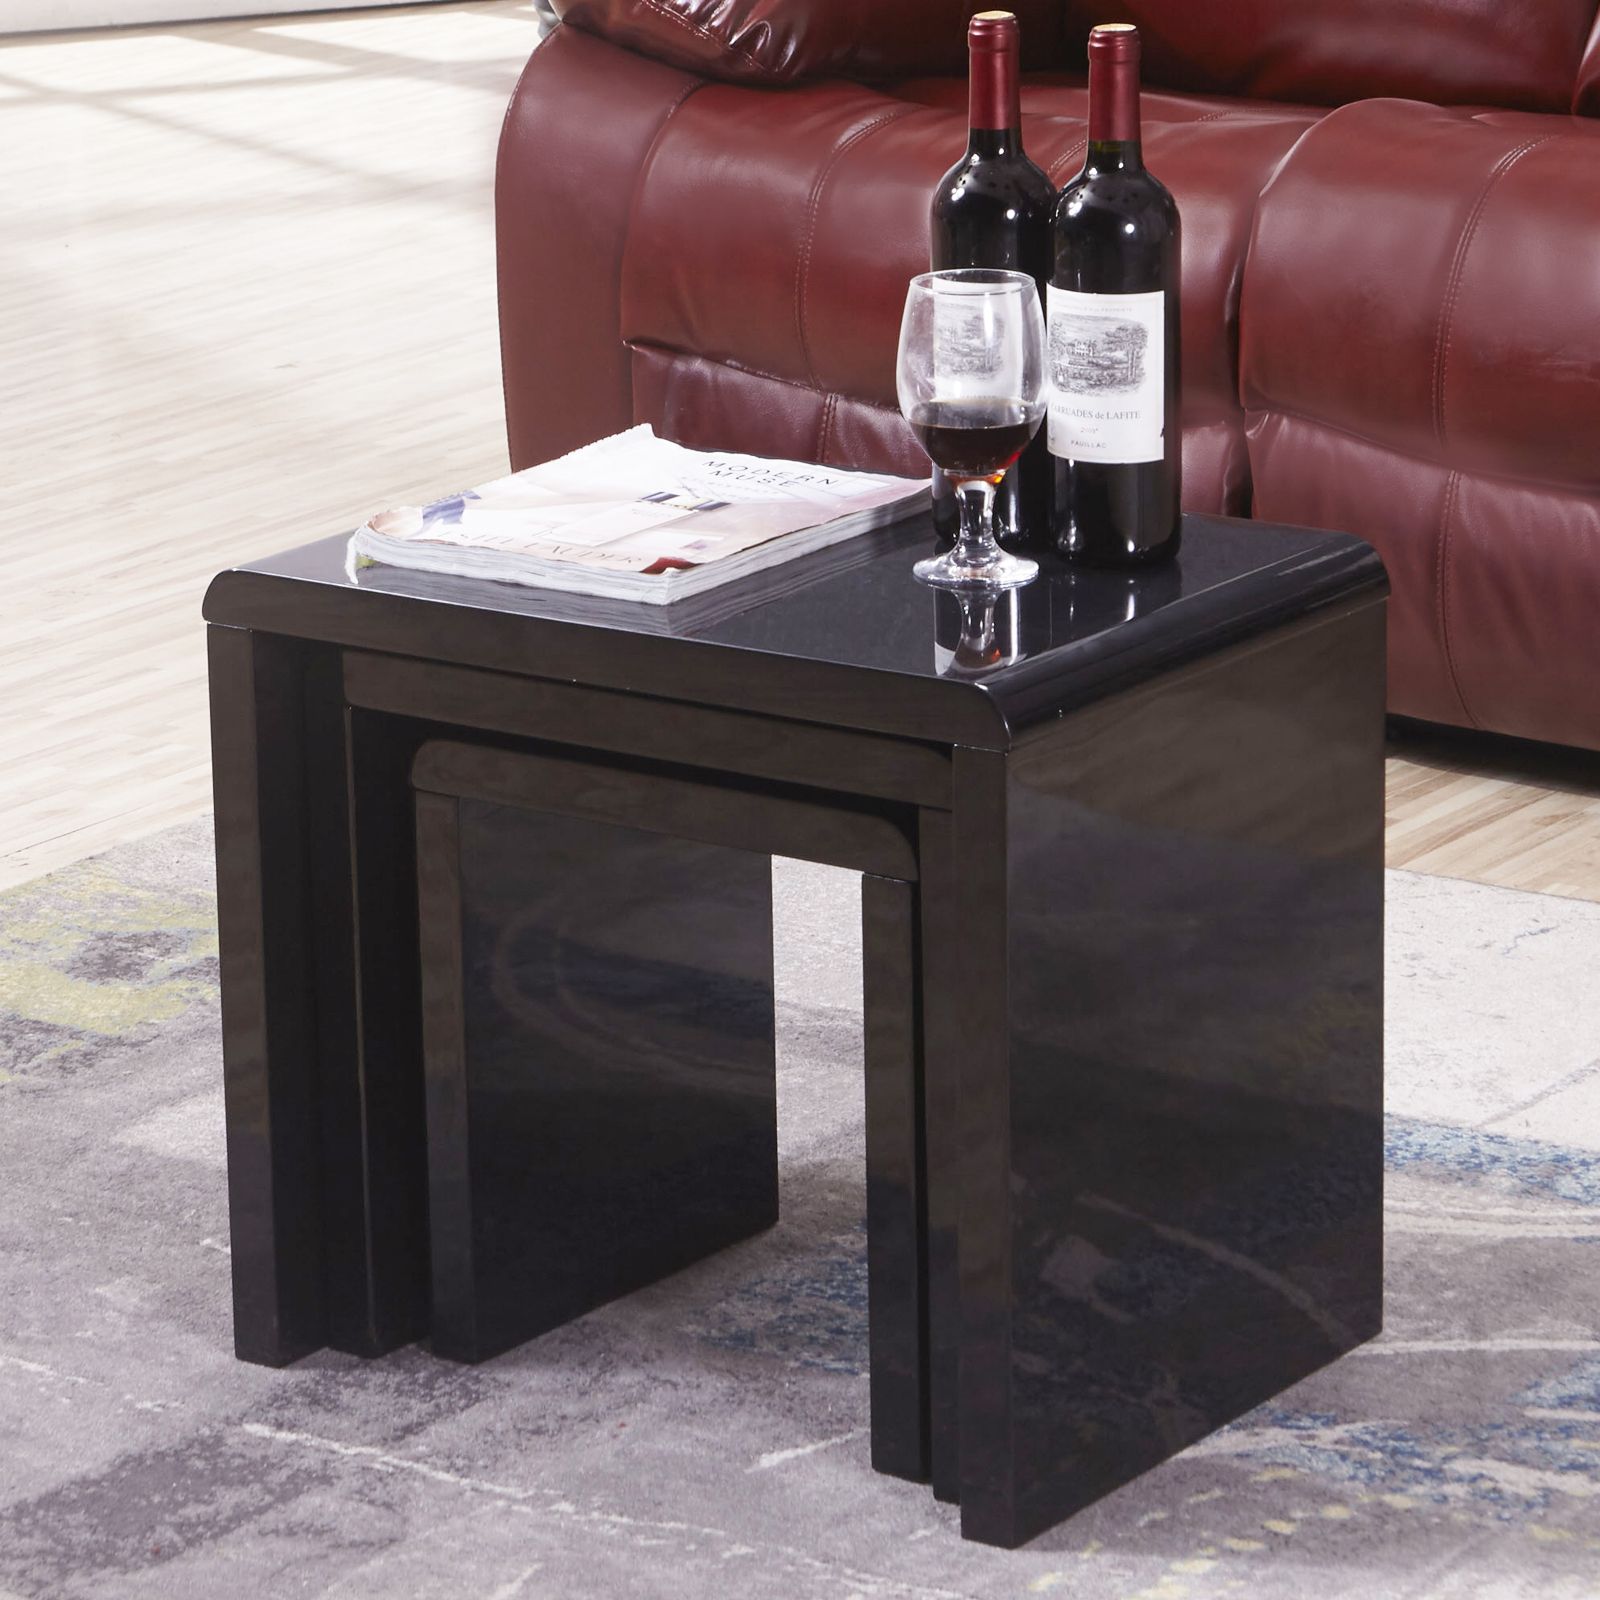 New Modern Design High Gloss Black Nest Of 3 Coffee Table/side Table With Regard To High Gloss Black Coffee Tables (Gallery 18 of 20)